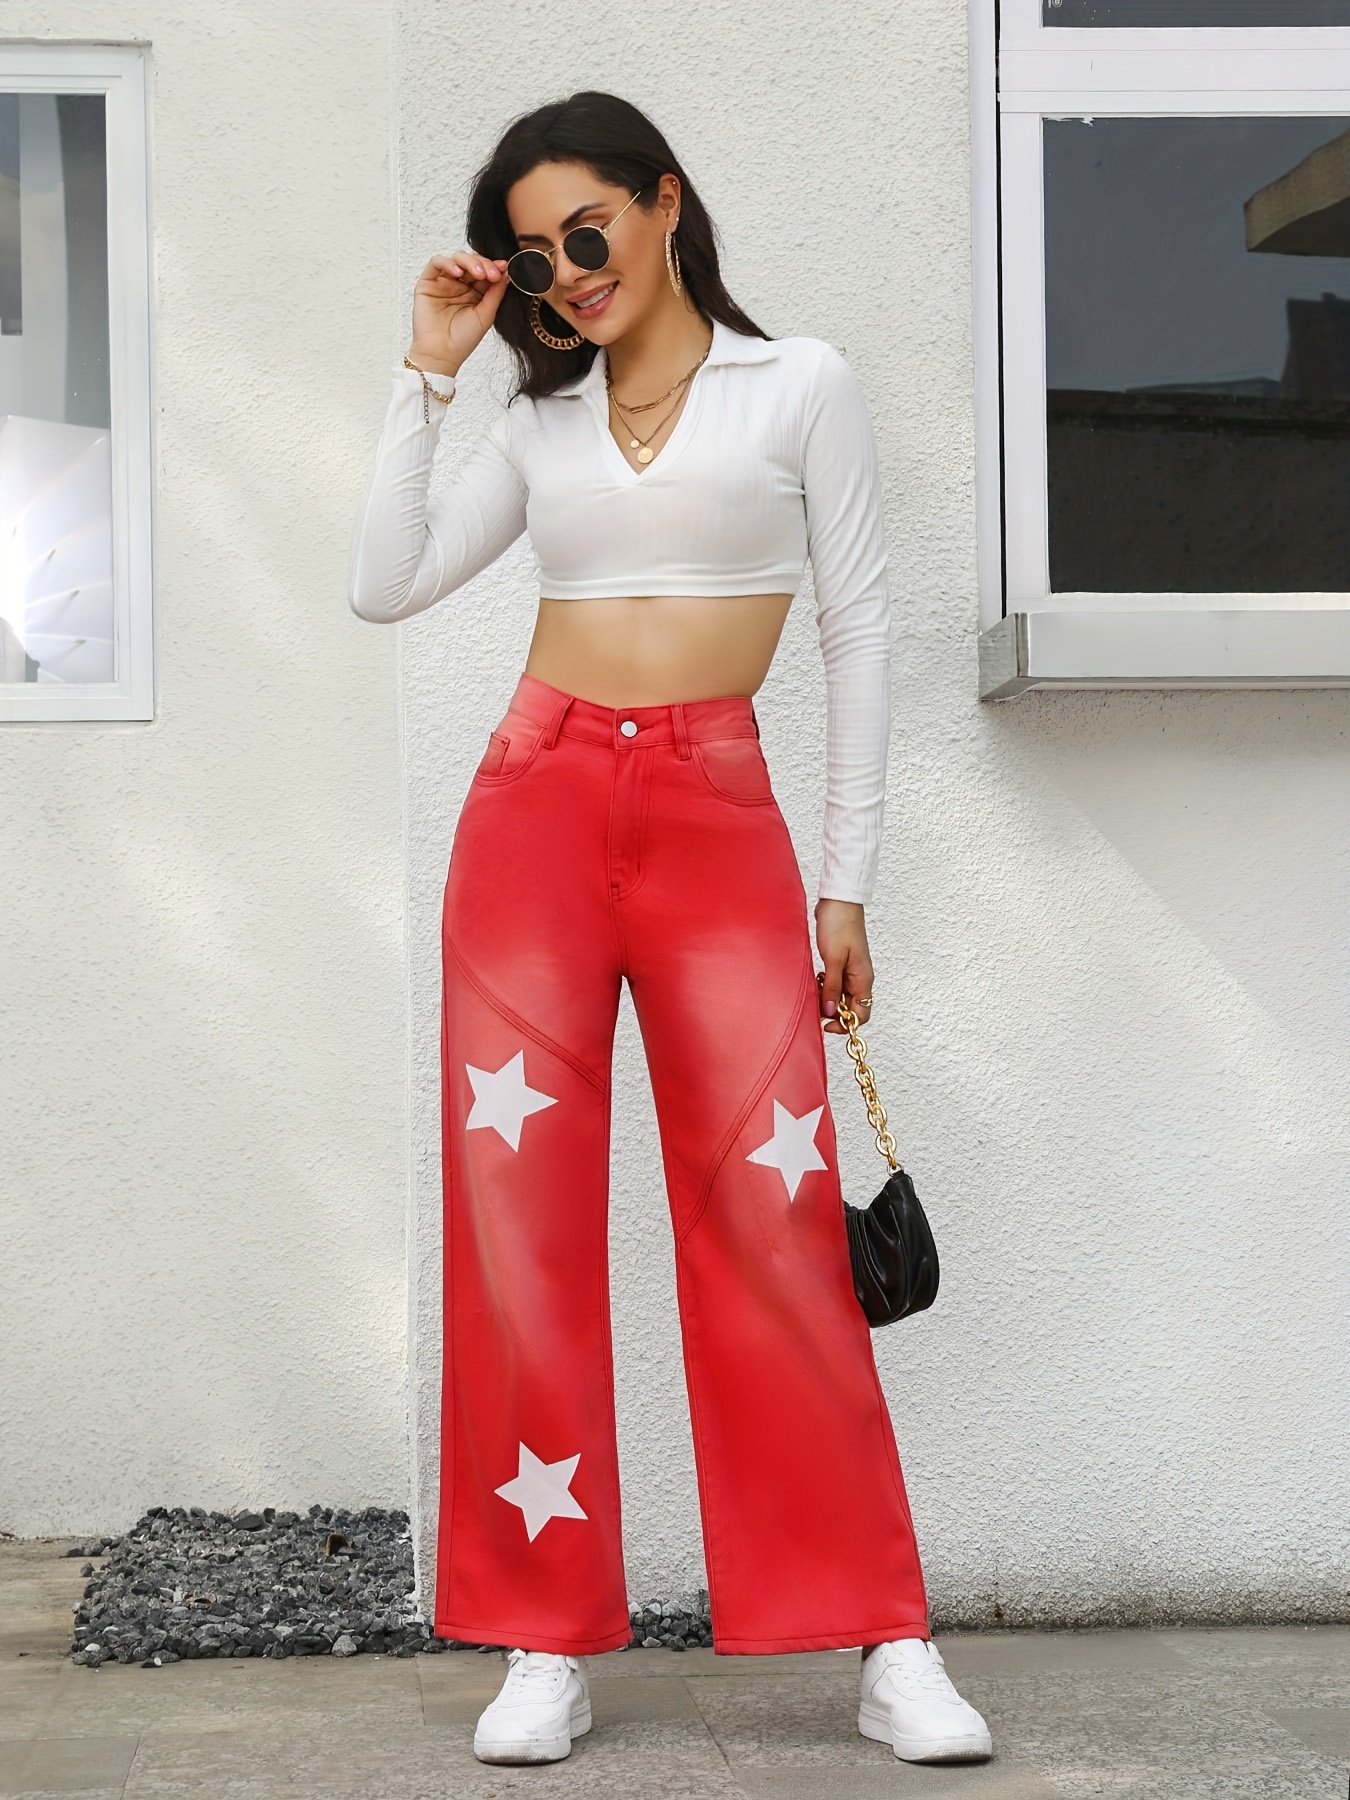 Bell Bottom Blog  Bell bottom jeans outfit, Red pants fashion, Everyday  girl fashion